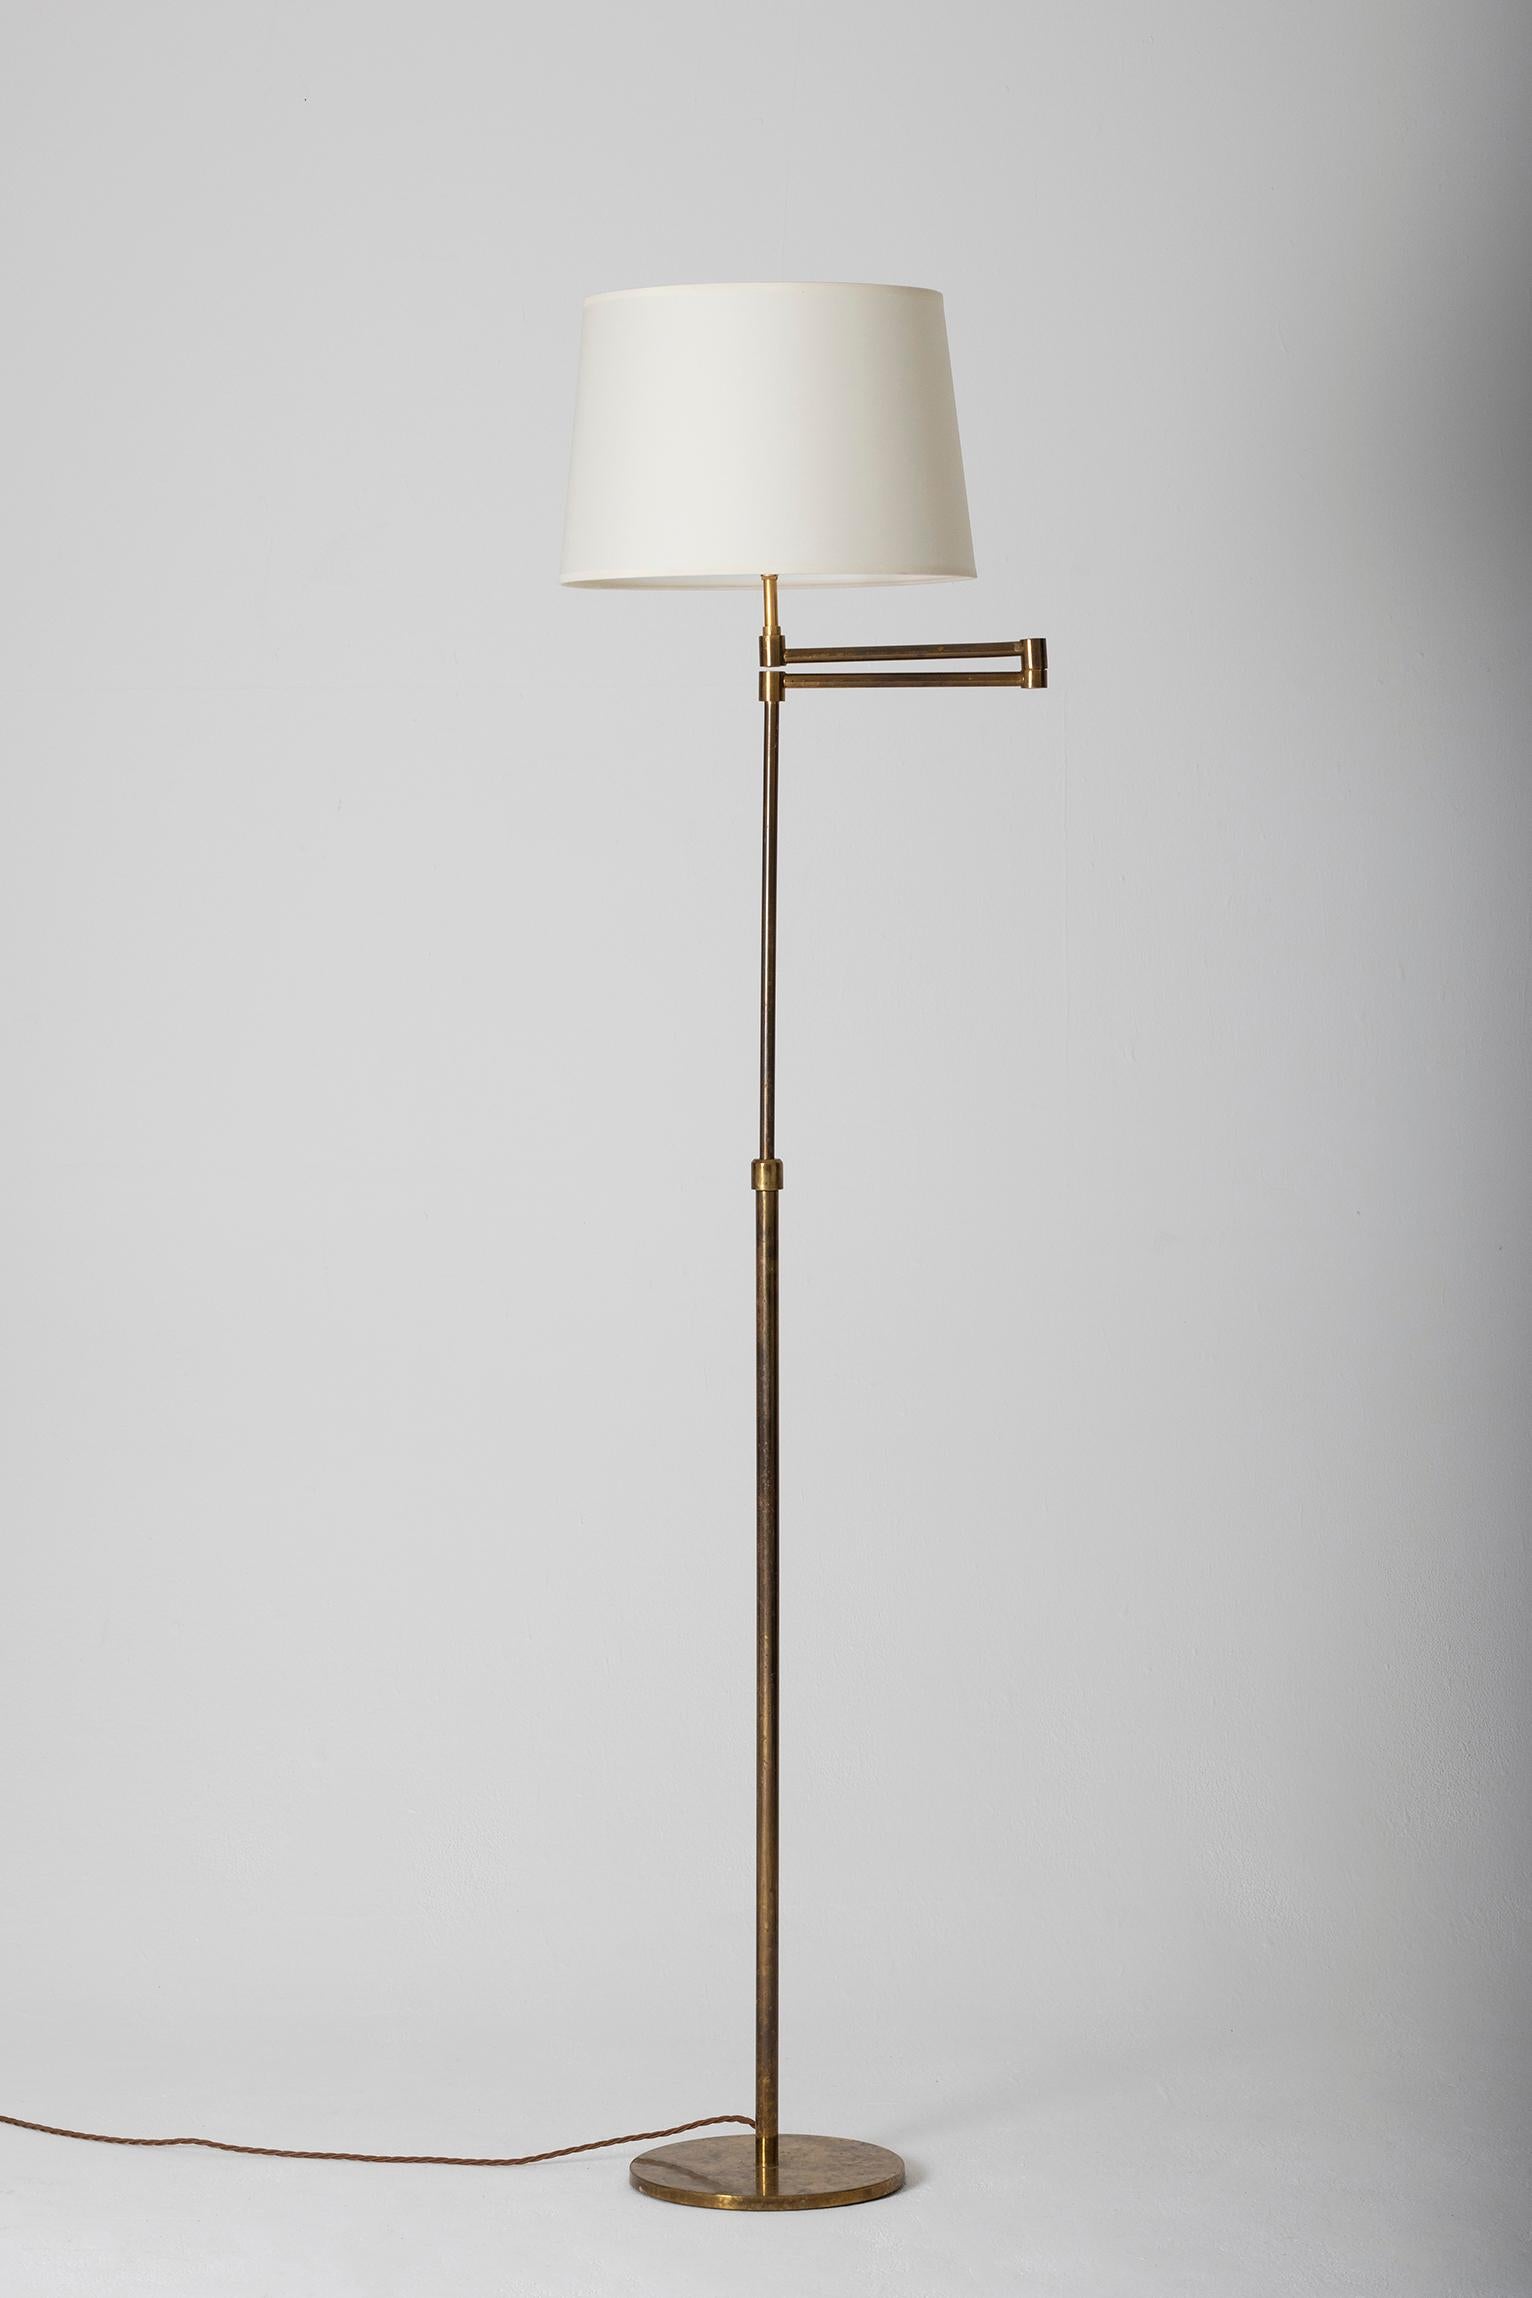 A brass telescopic reading floor lamp, with a swiveling arm.
France, third quarter of the 20th century.
The height can vary between 140 and 180 cm.
Diameter of the brass base is 24 cm. The diameter of the shade is 36 cm.